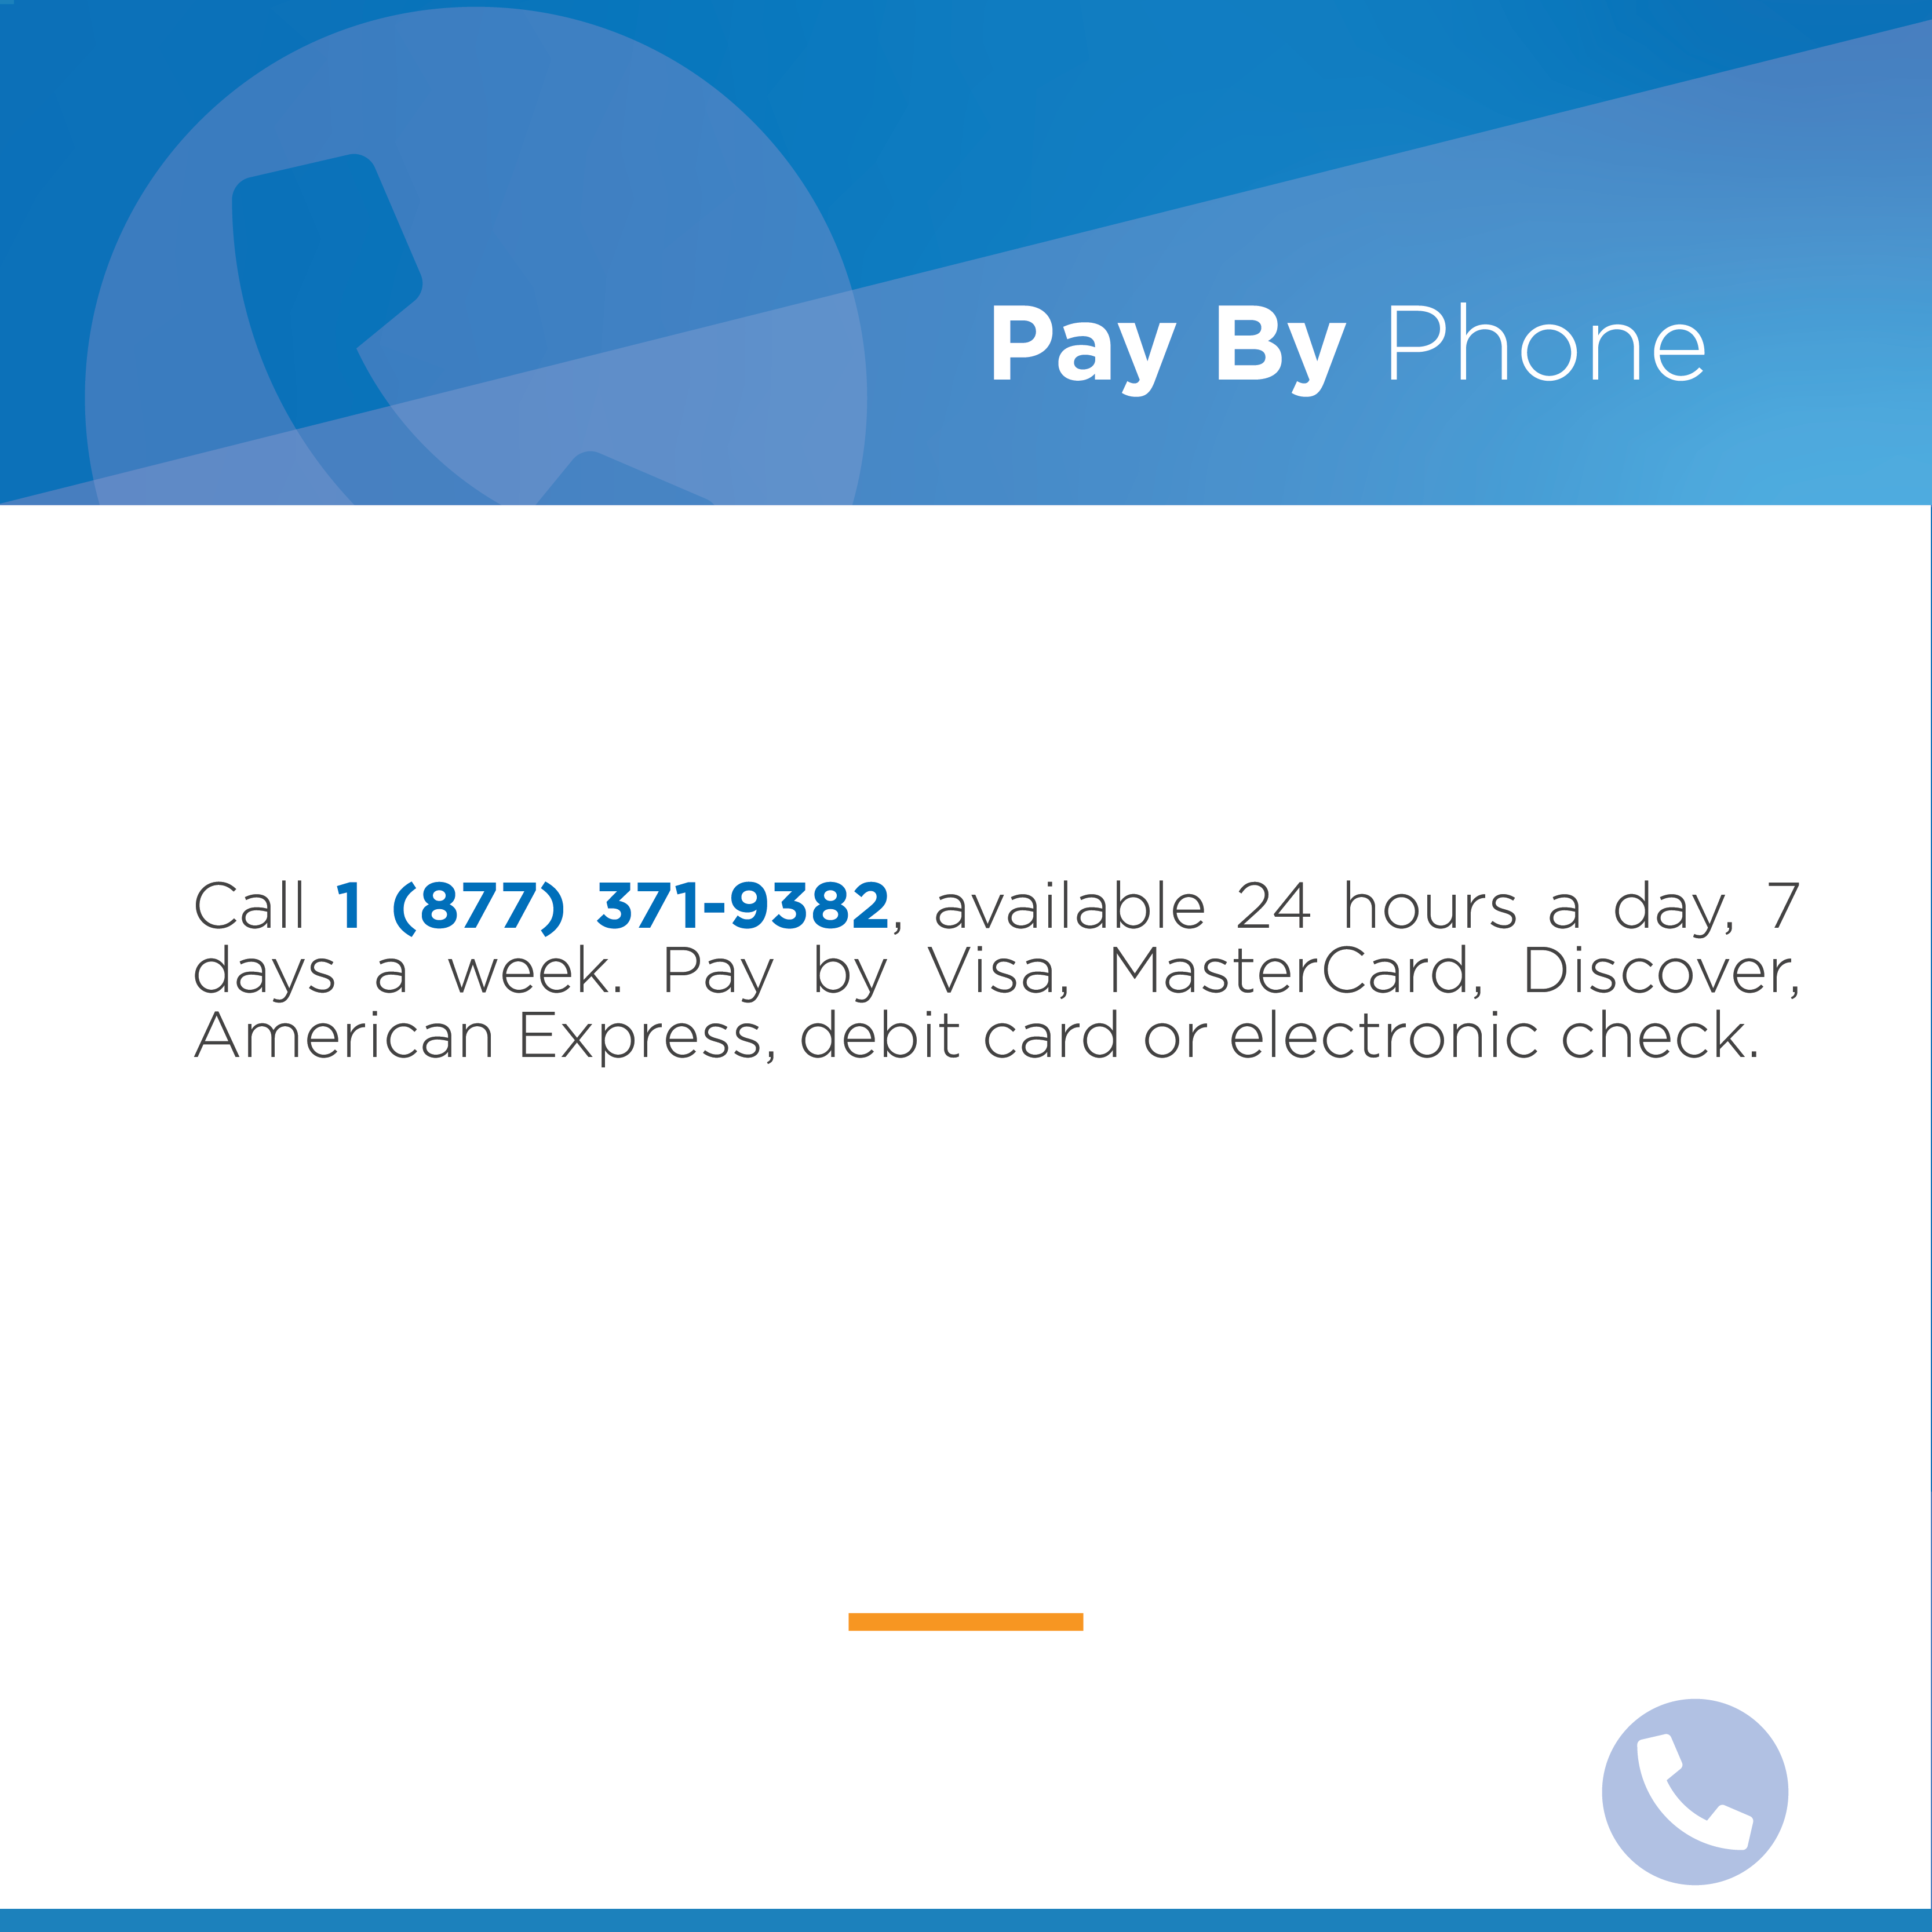 seco-bill-pay-by-phone-customer-service-savepaying